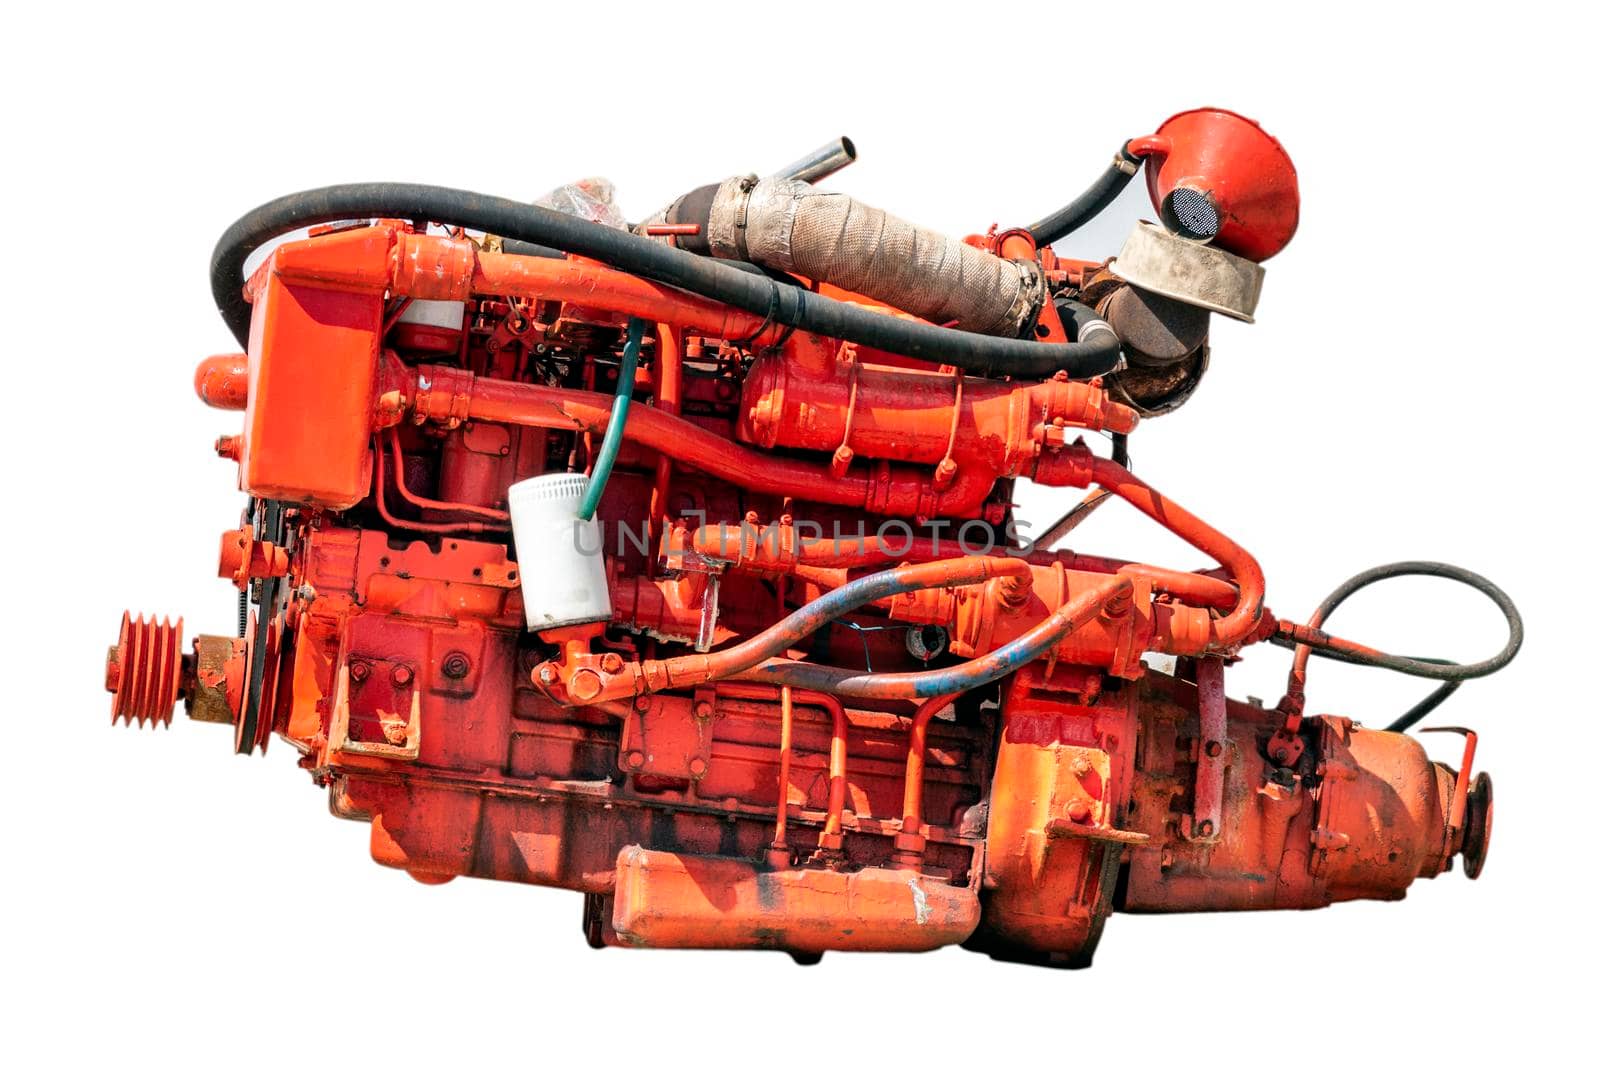 Old red diesel engine of a boat, isolated on white background.